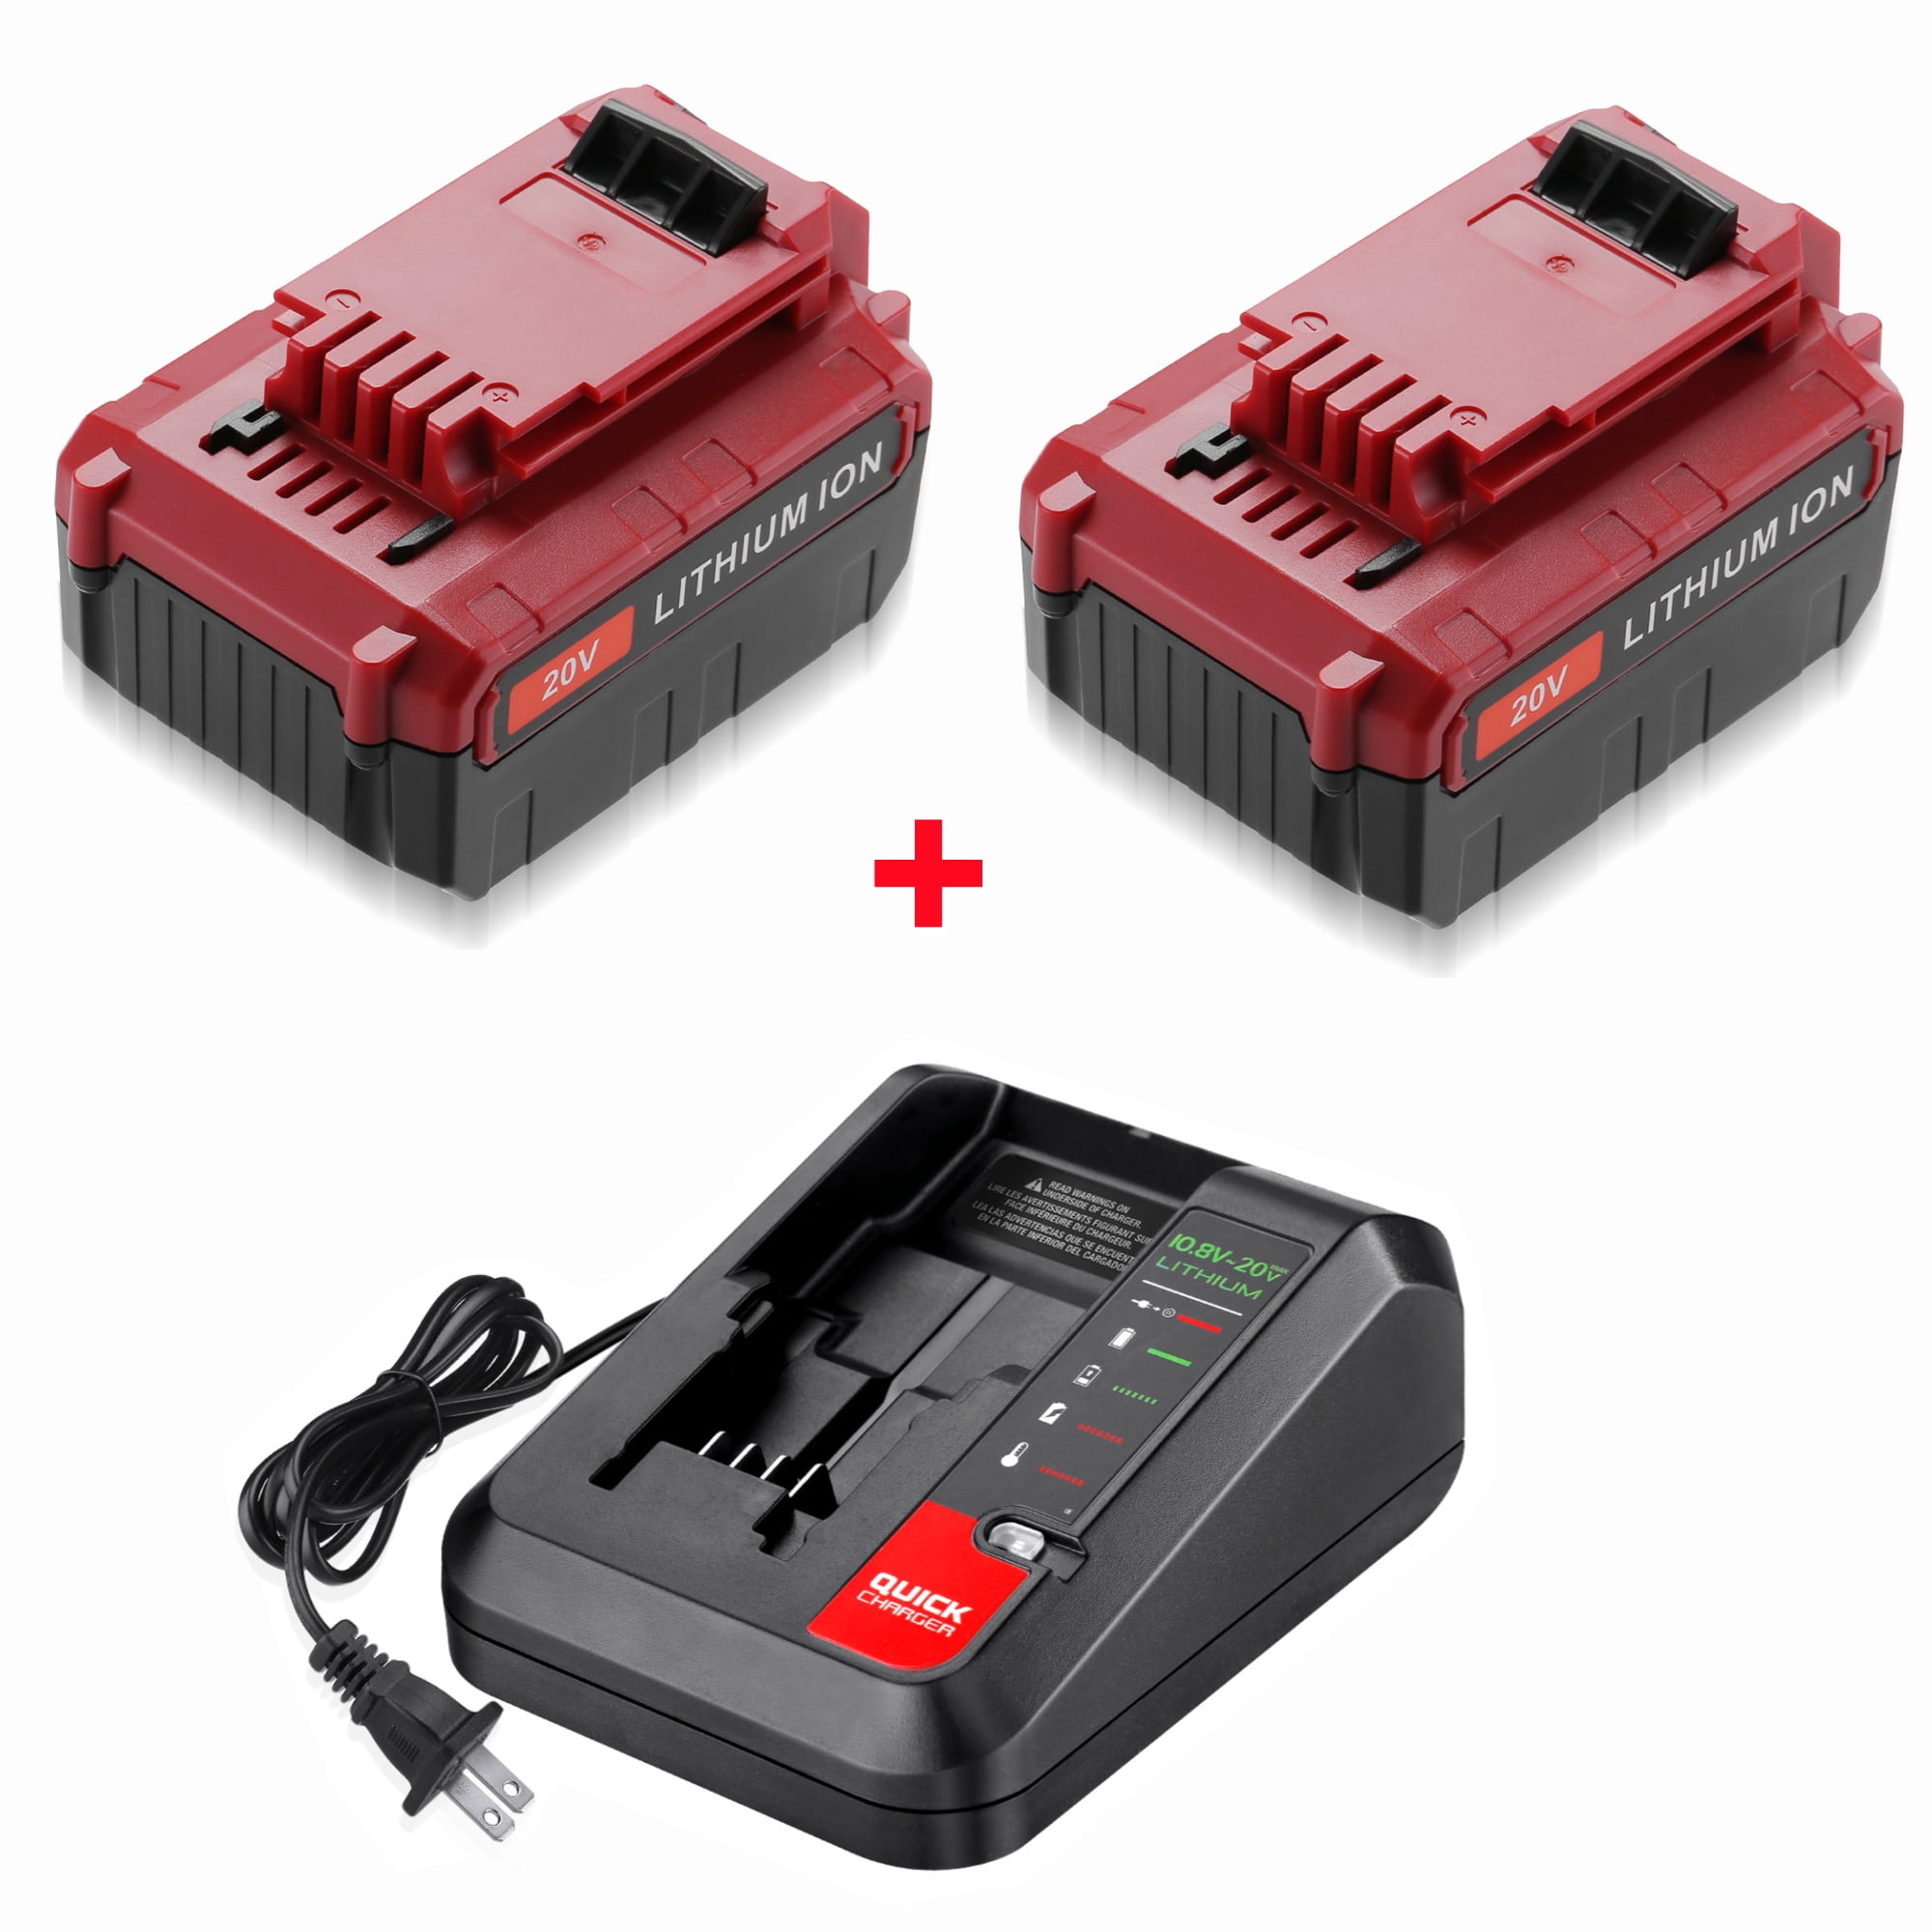 20V 6.0Ah Lithium 6.0 Battery & Qickly charger PCC681L PCC641 For Porter Cable 